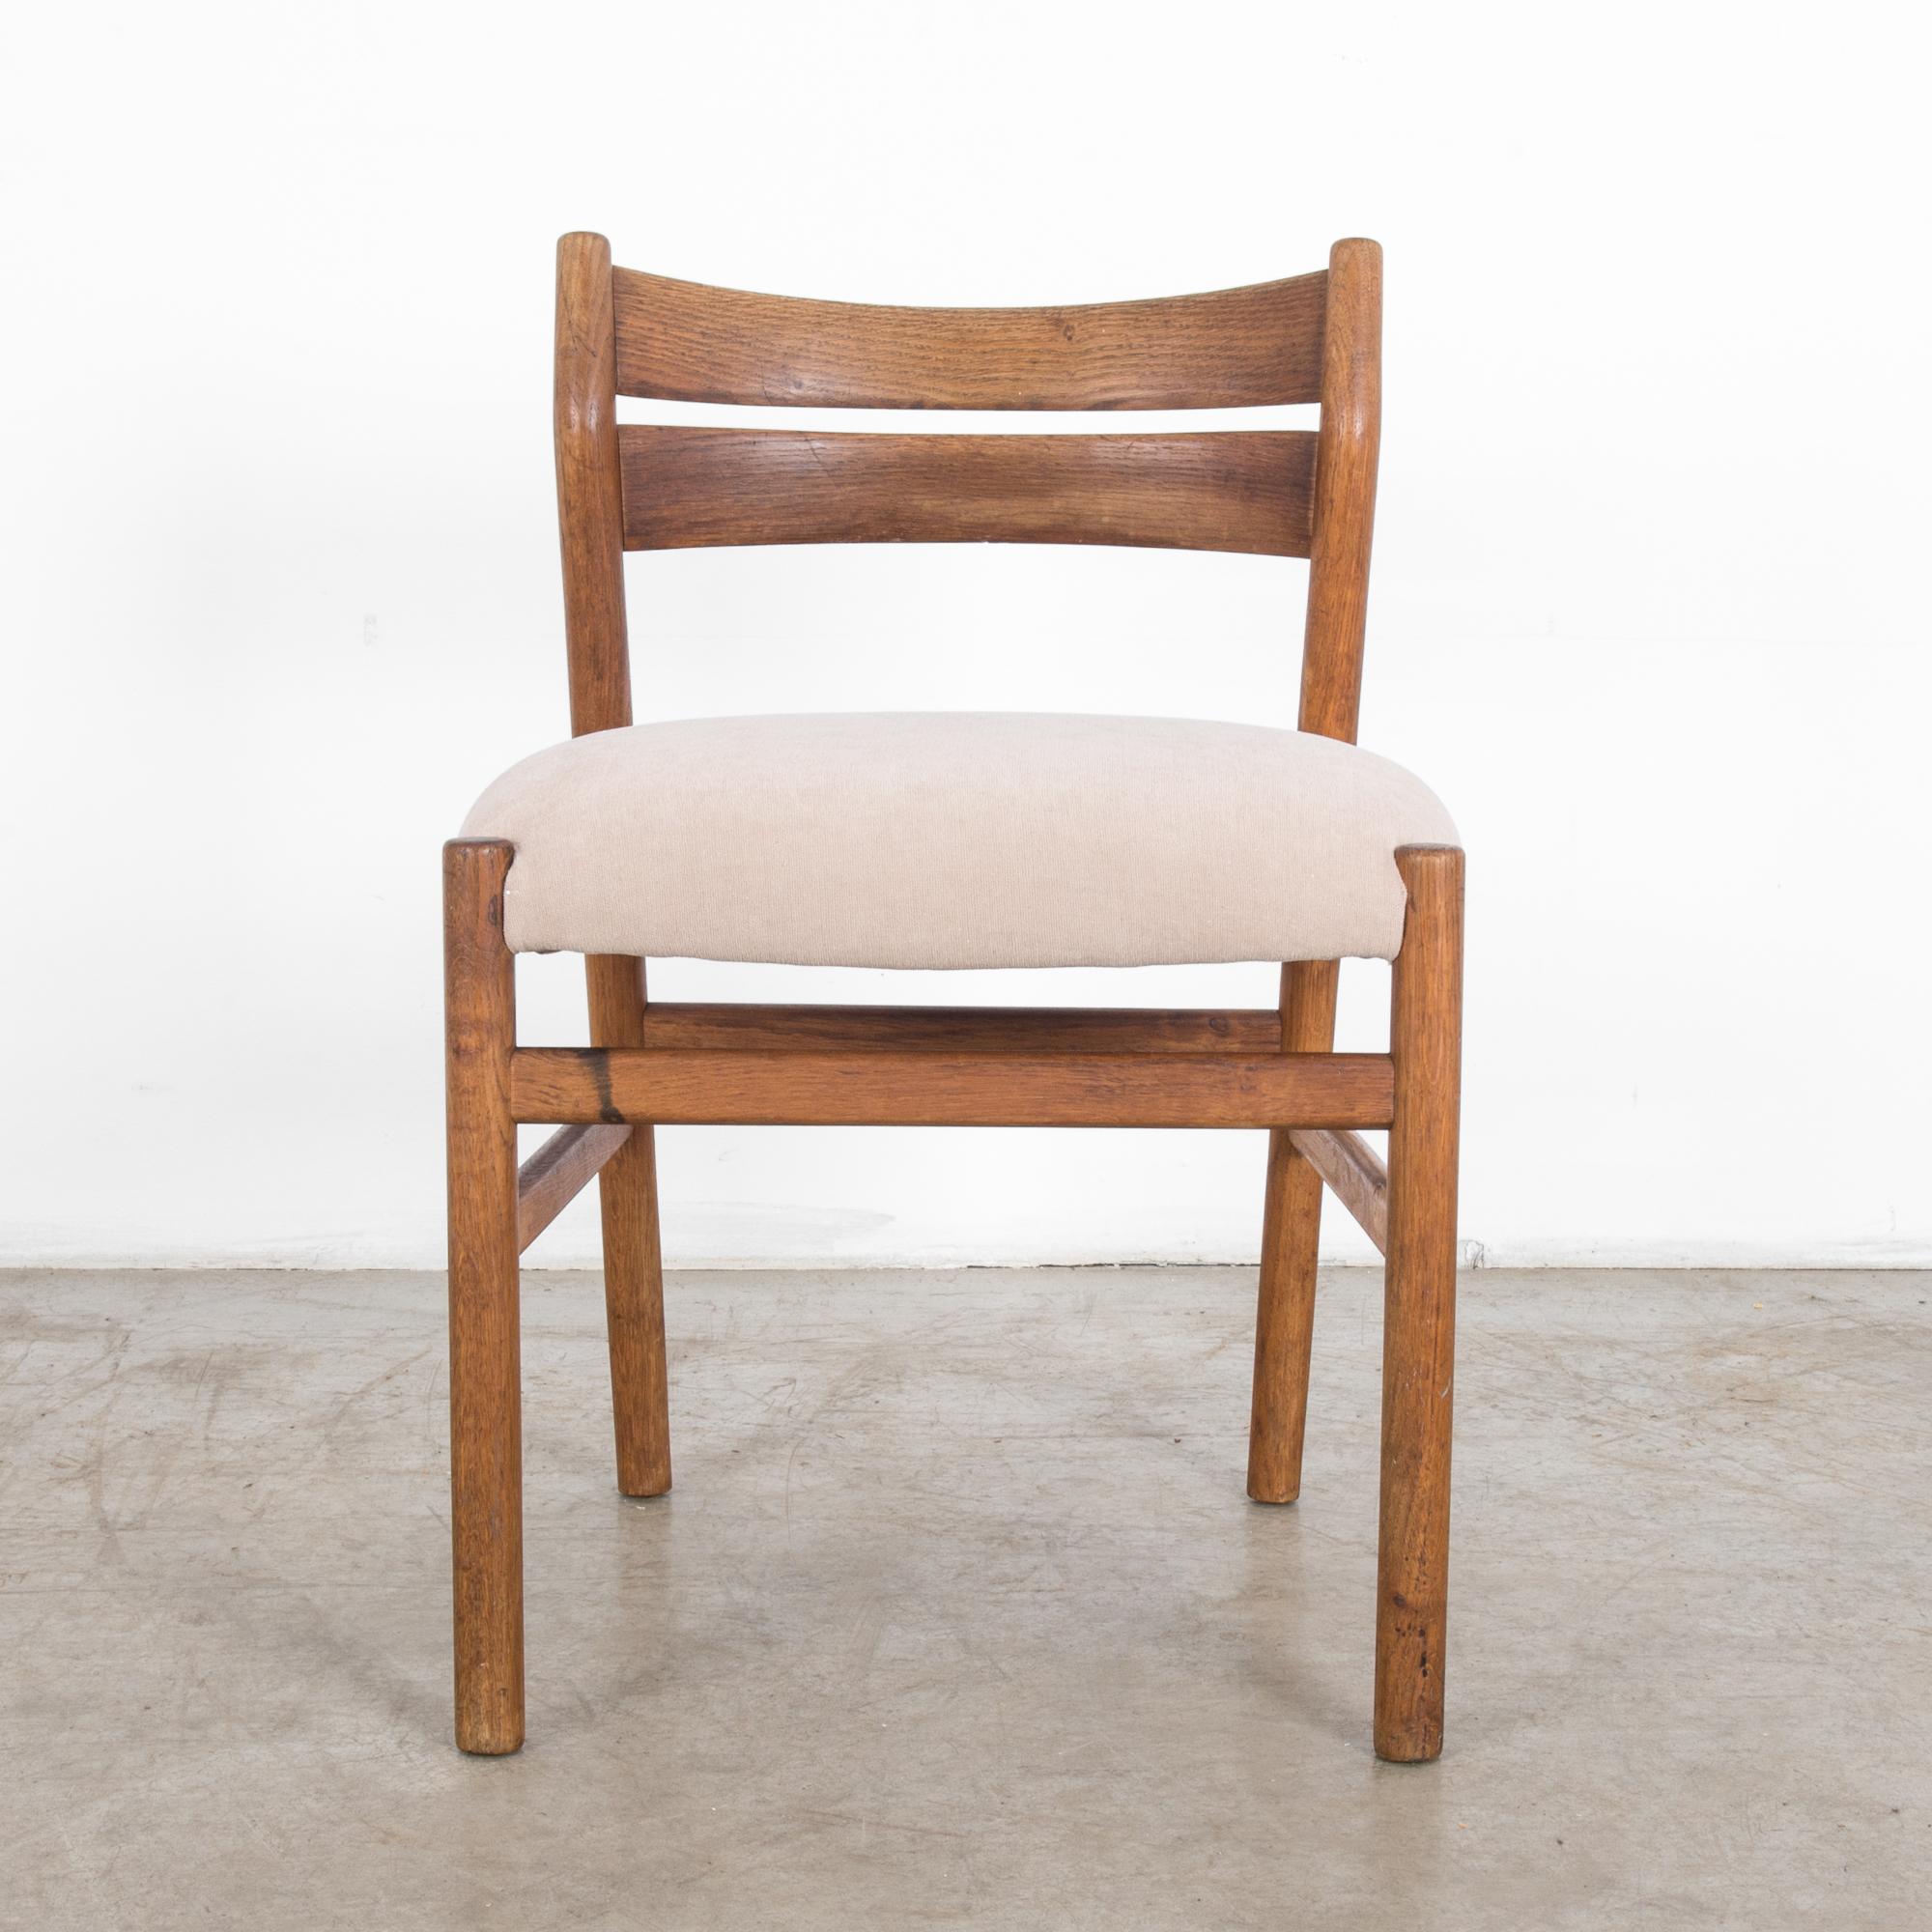 This oak chair was made in Denmark, circa 1960. The upholstered fawn seat rests on a wide and sturdy frame with stretchers on all sides. A pair of rails set on its low back curves gently, and the top tilts slightly backward. The warm, brown tone